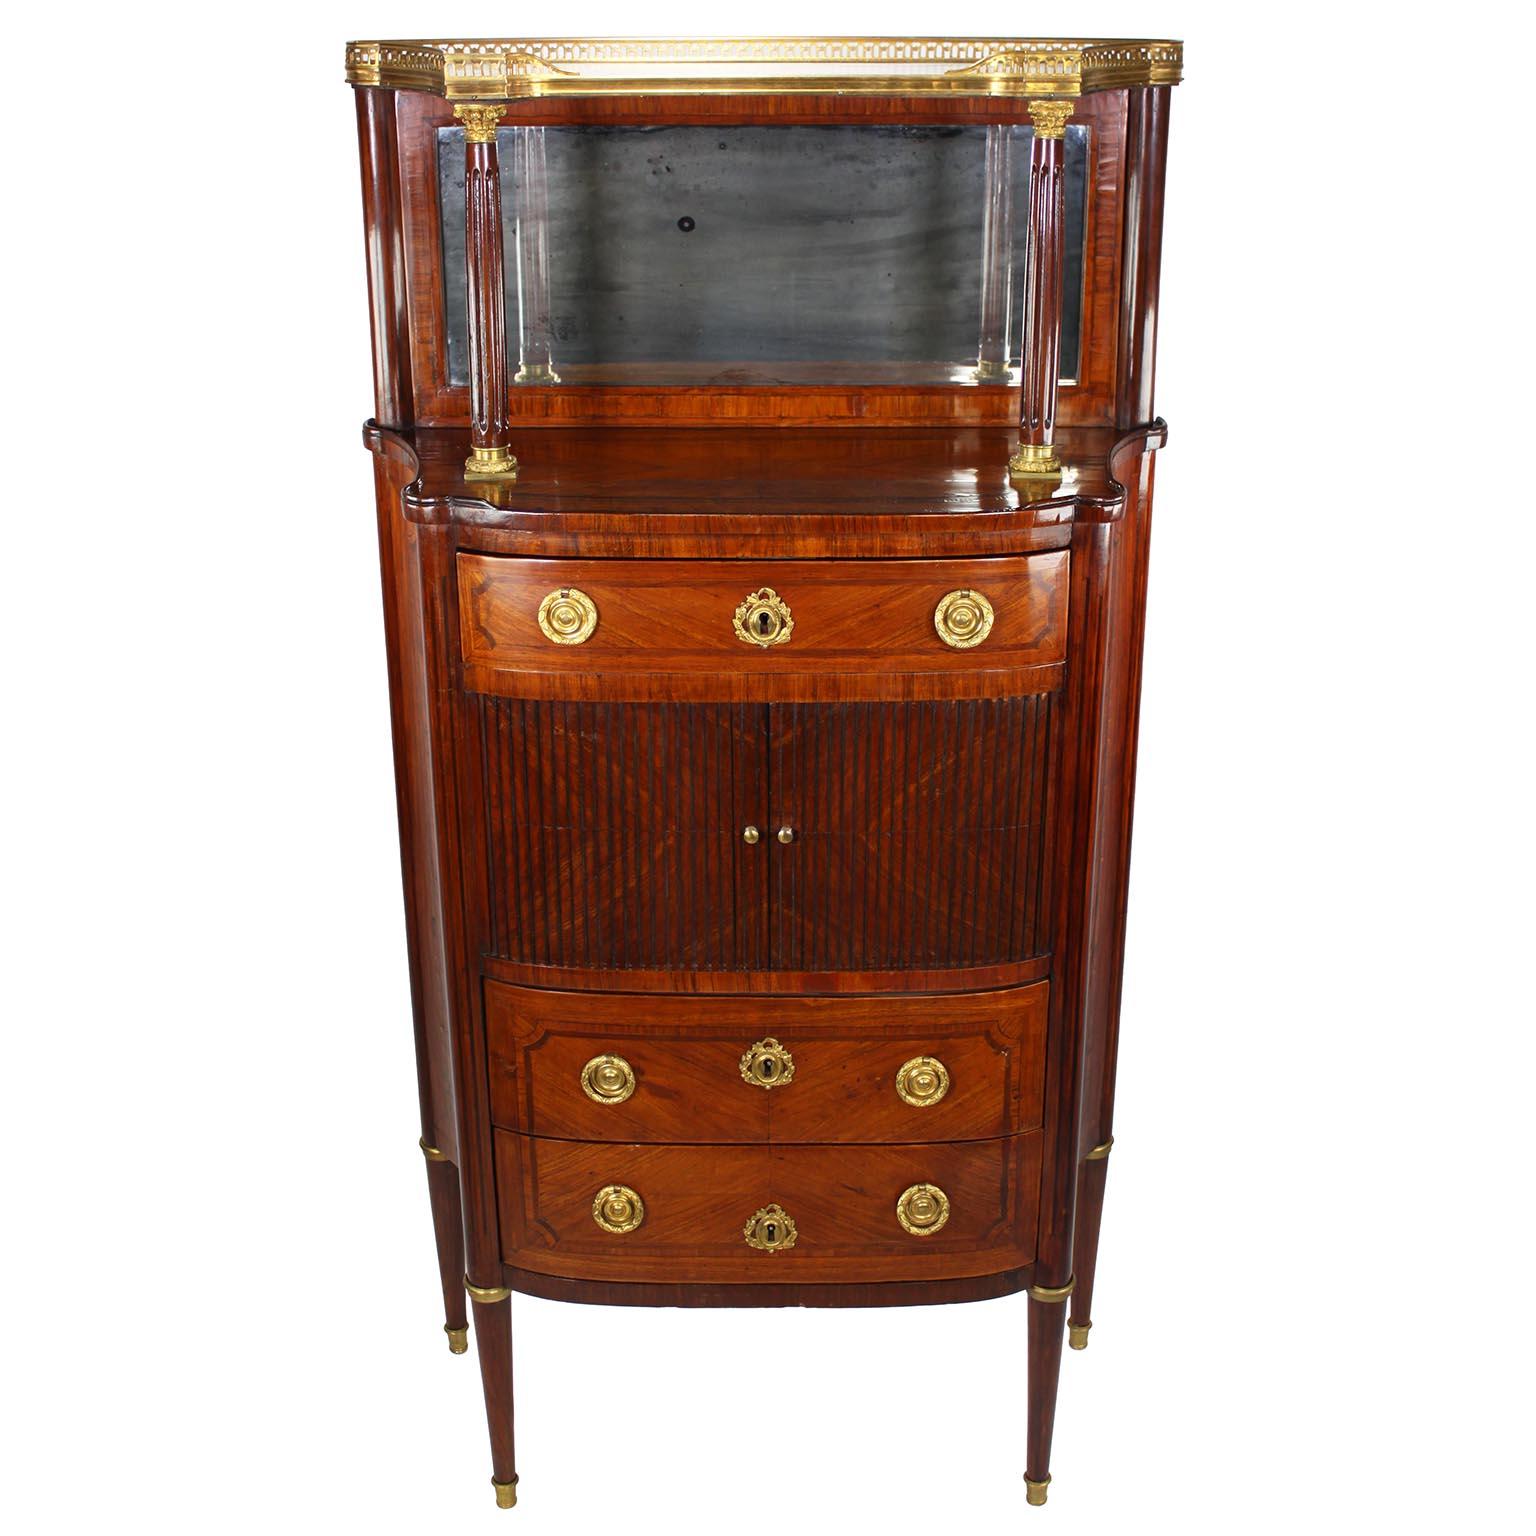 A Fine French 19th Century Louis XVI Style Gilt-Bronze Mounted Meuble d'Appui Cabinet with Marble Top. The serpentine walnut and satinwood body with three front drawers and a rolled paneled door, with gilt-bronze ring-pull-handles and keyhole